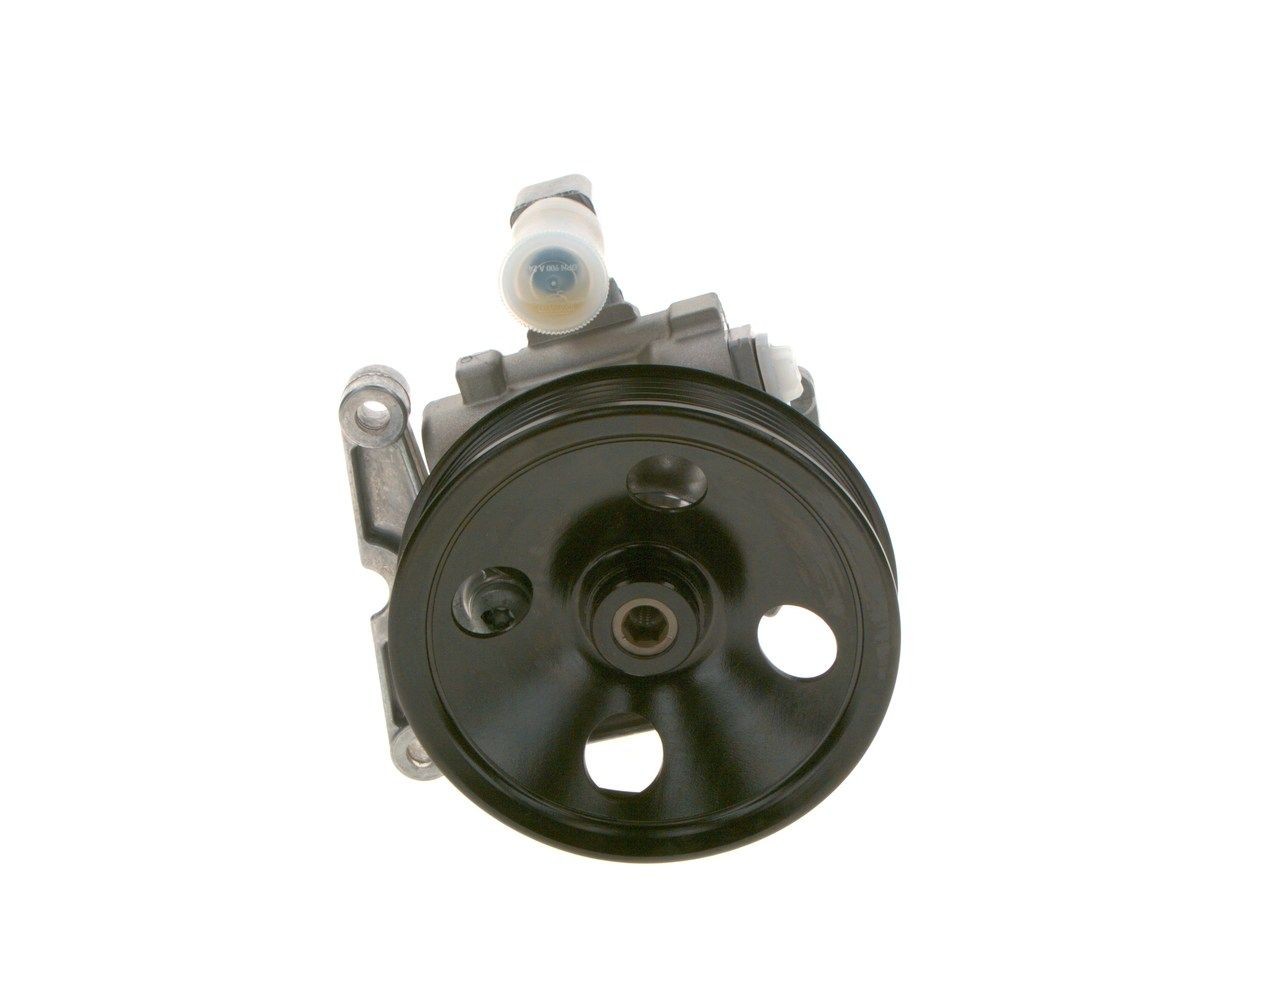 BOSCH Hydraulic steering pump K S01 000 593 suitable for ML W163